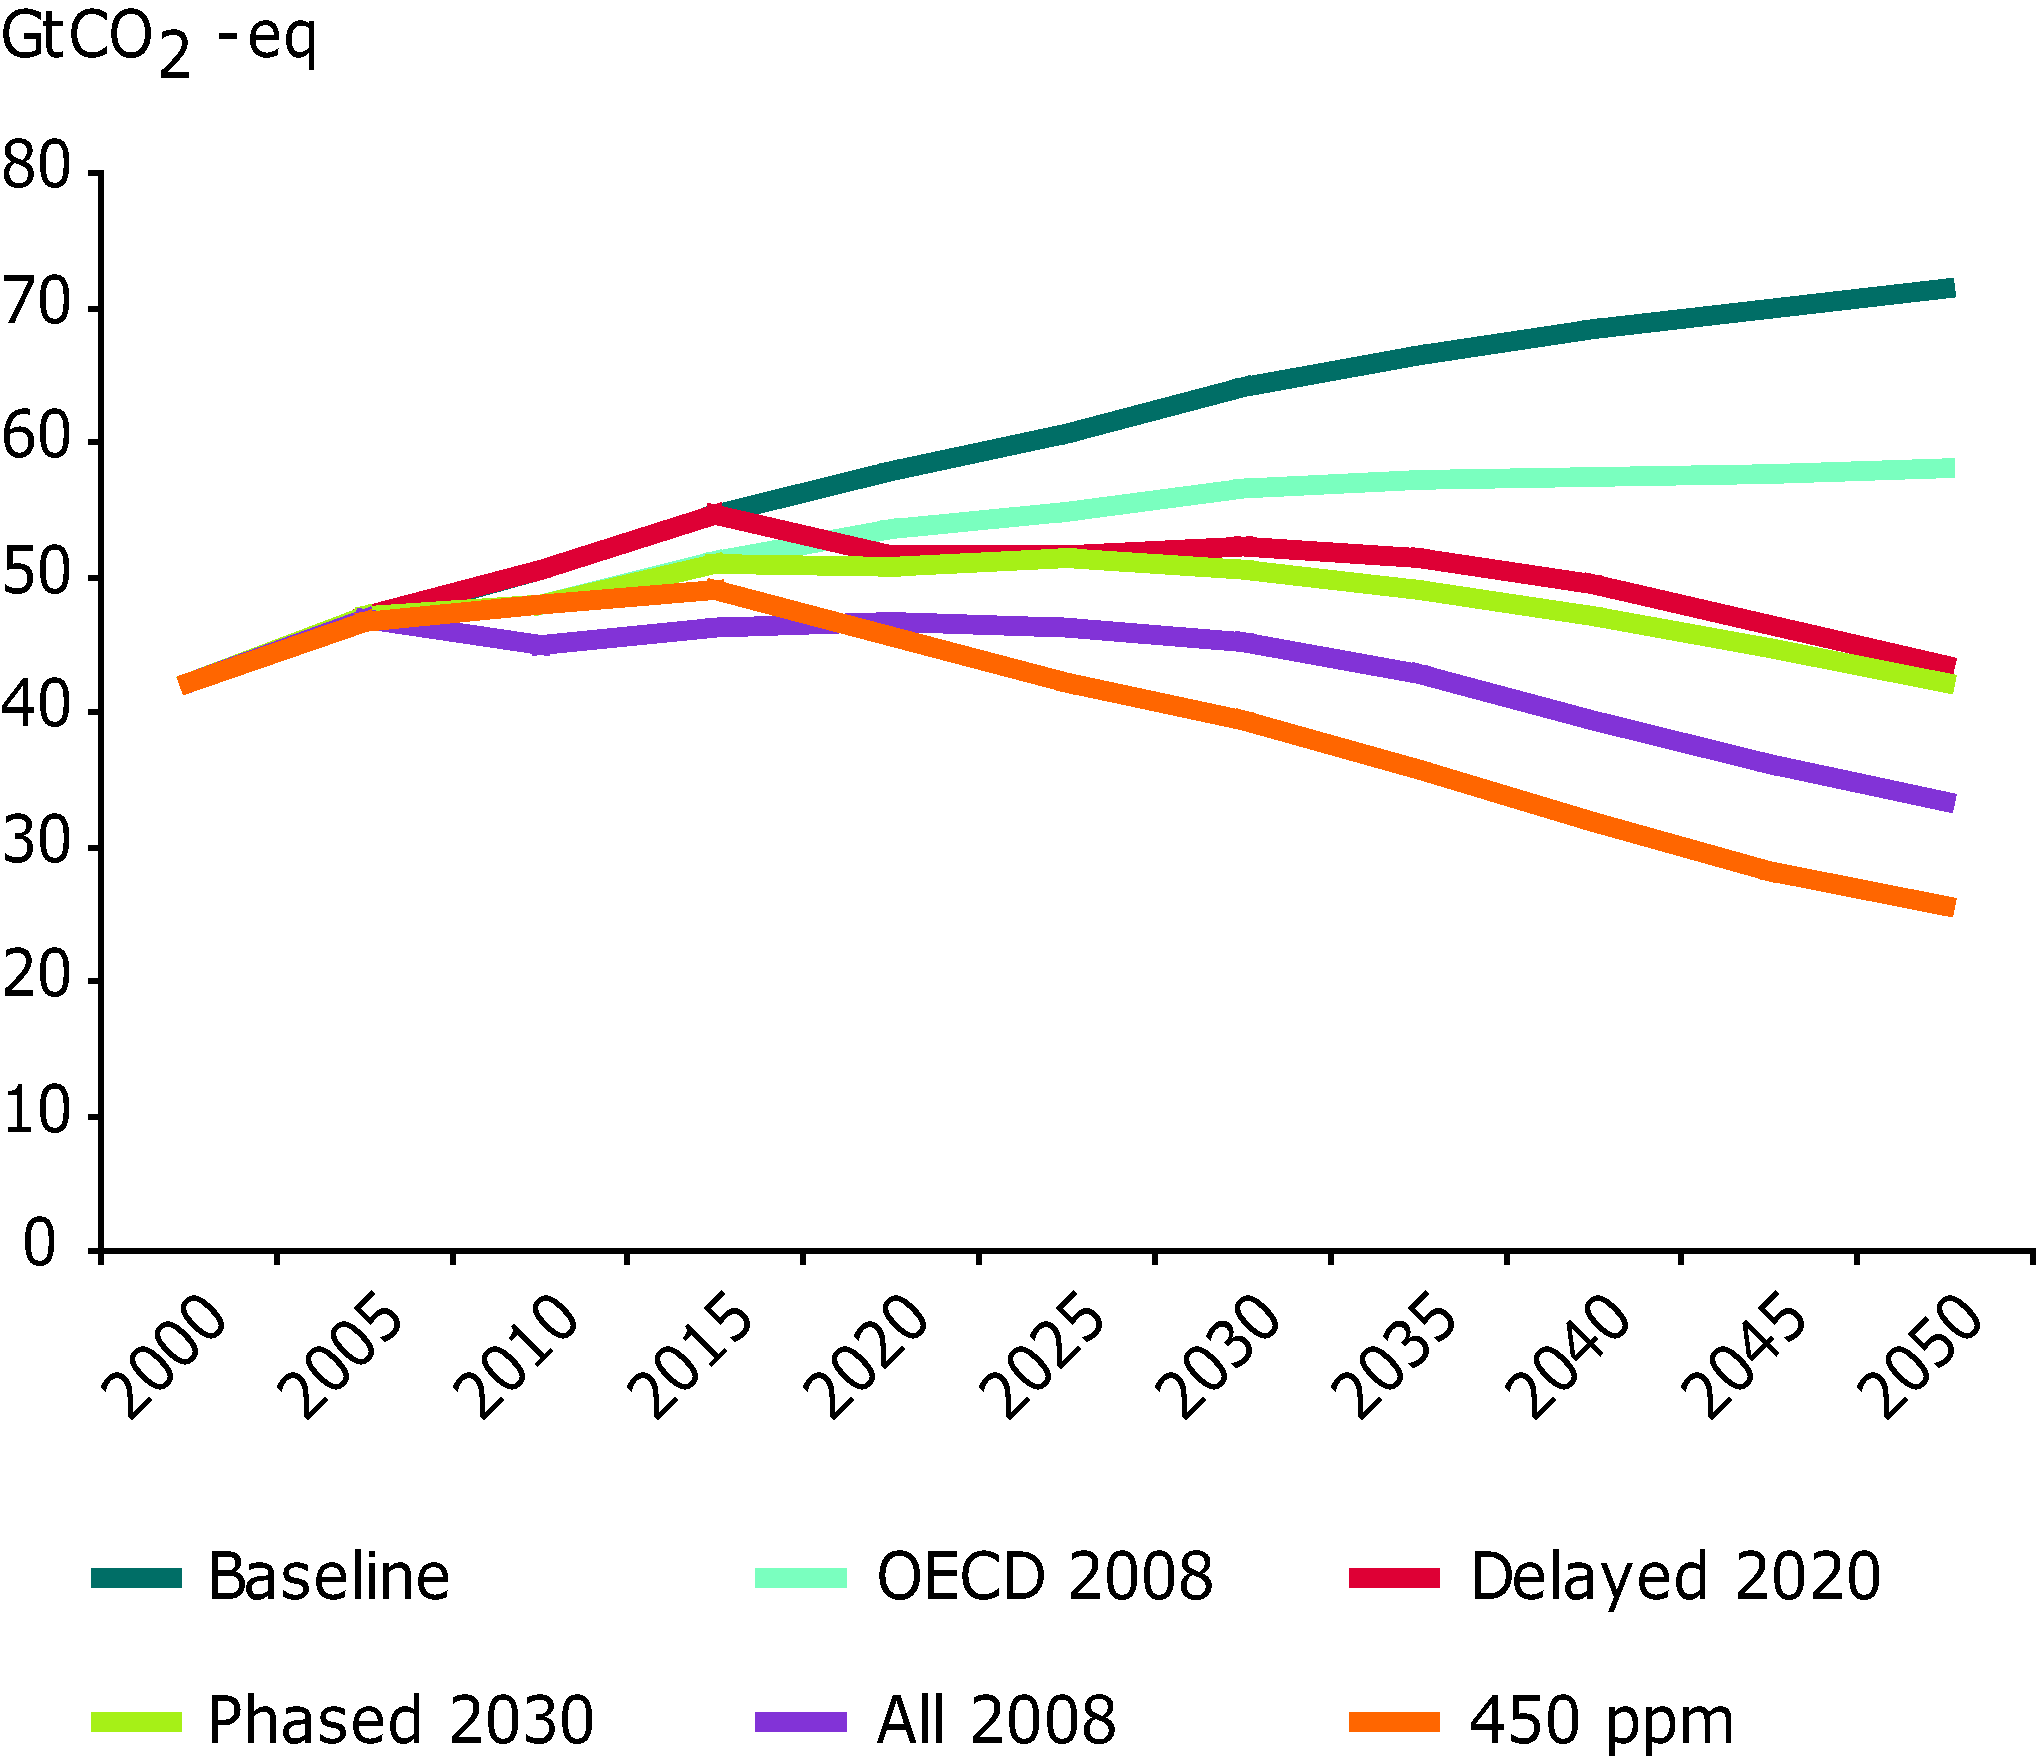 Impacts of policy scenarios on greenhouse gas emissions, 2000-2050